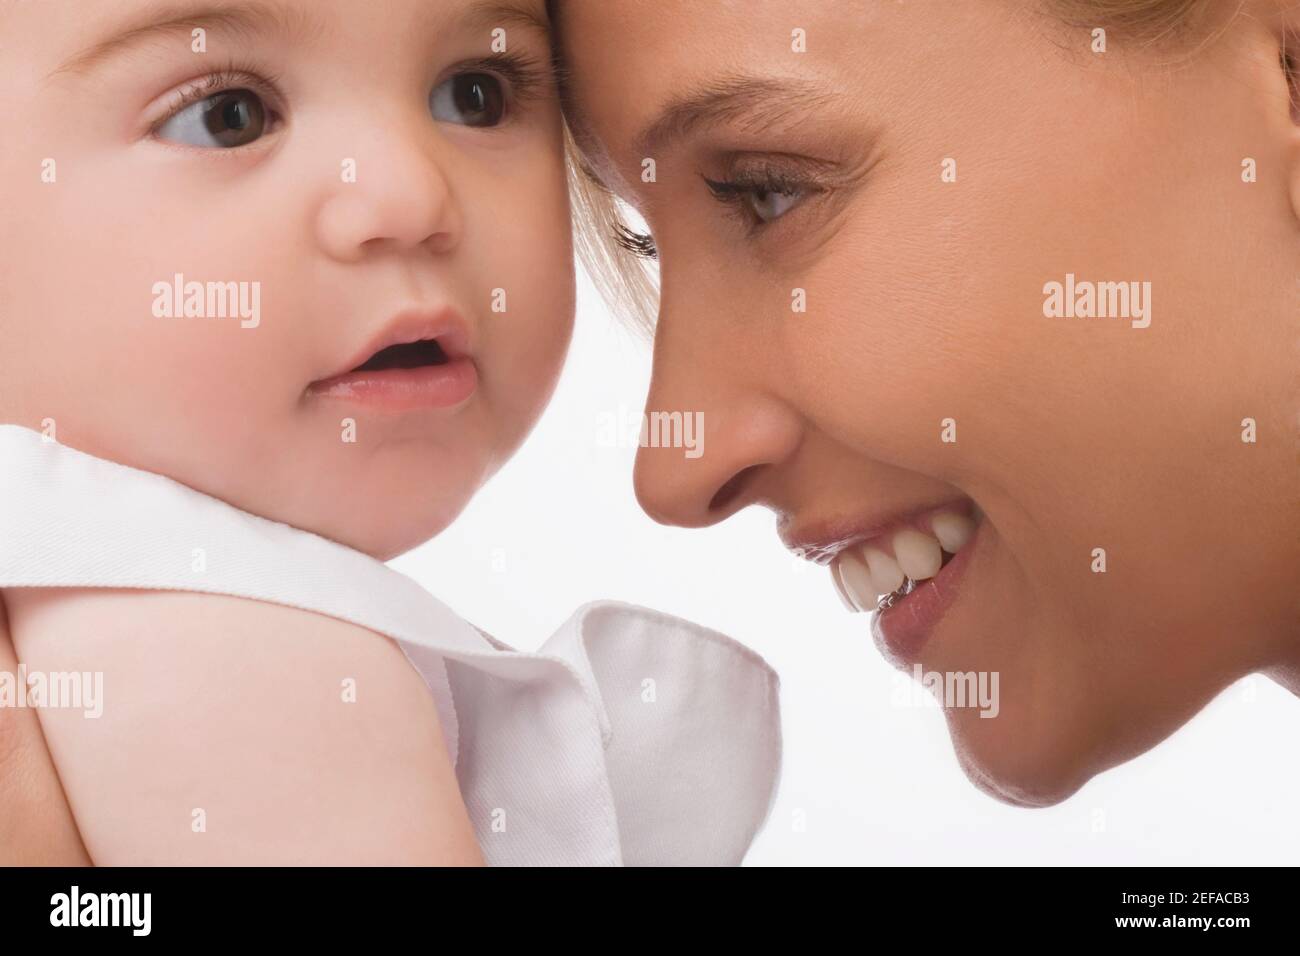 Close up of a mid adult woman smiling with her son Stock Photo